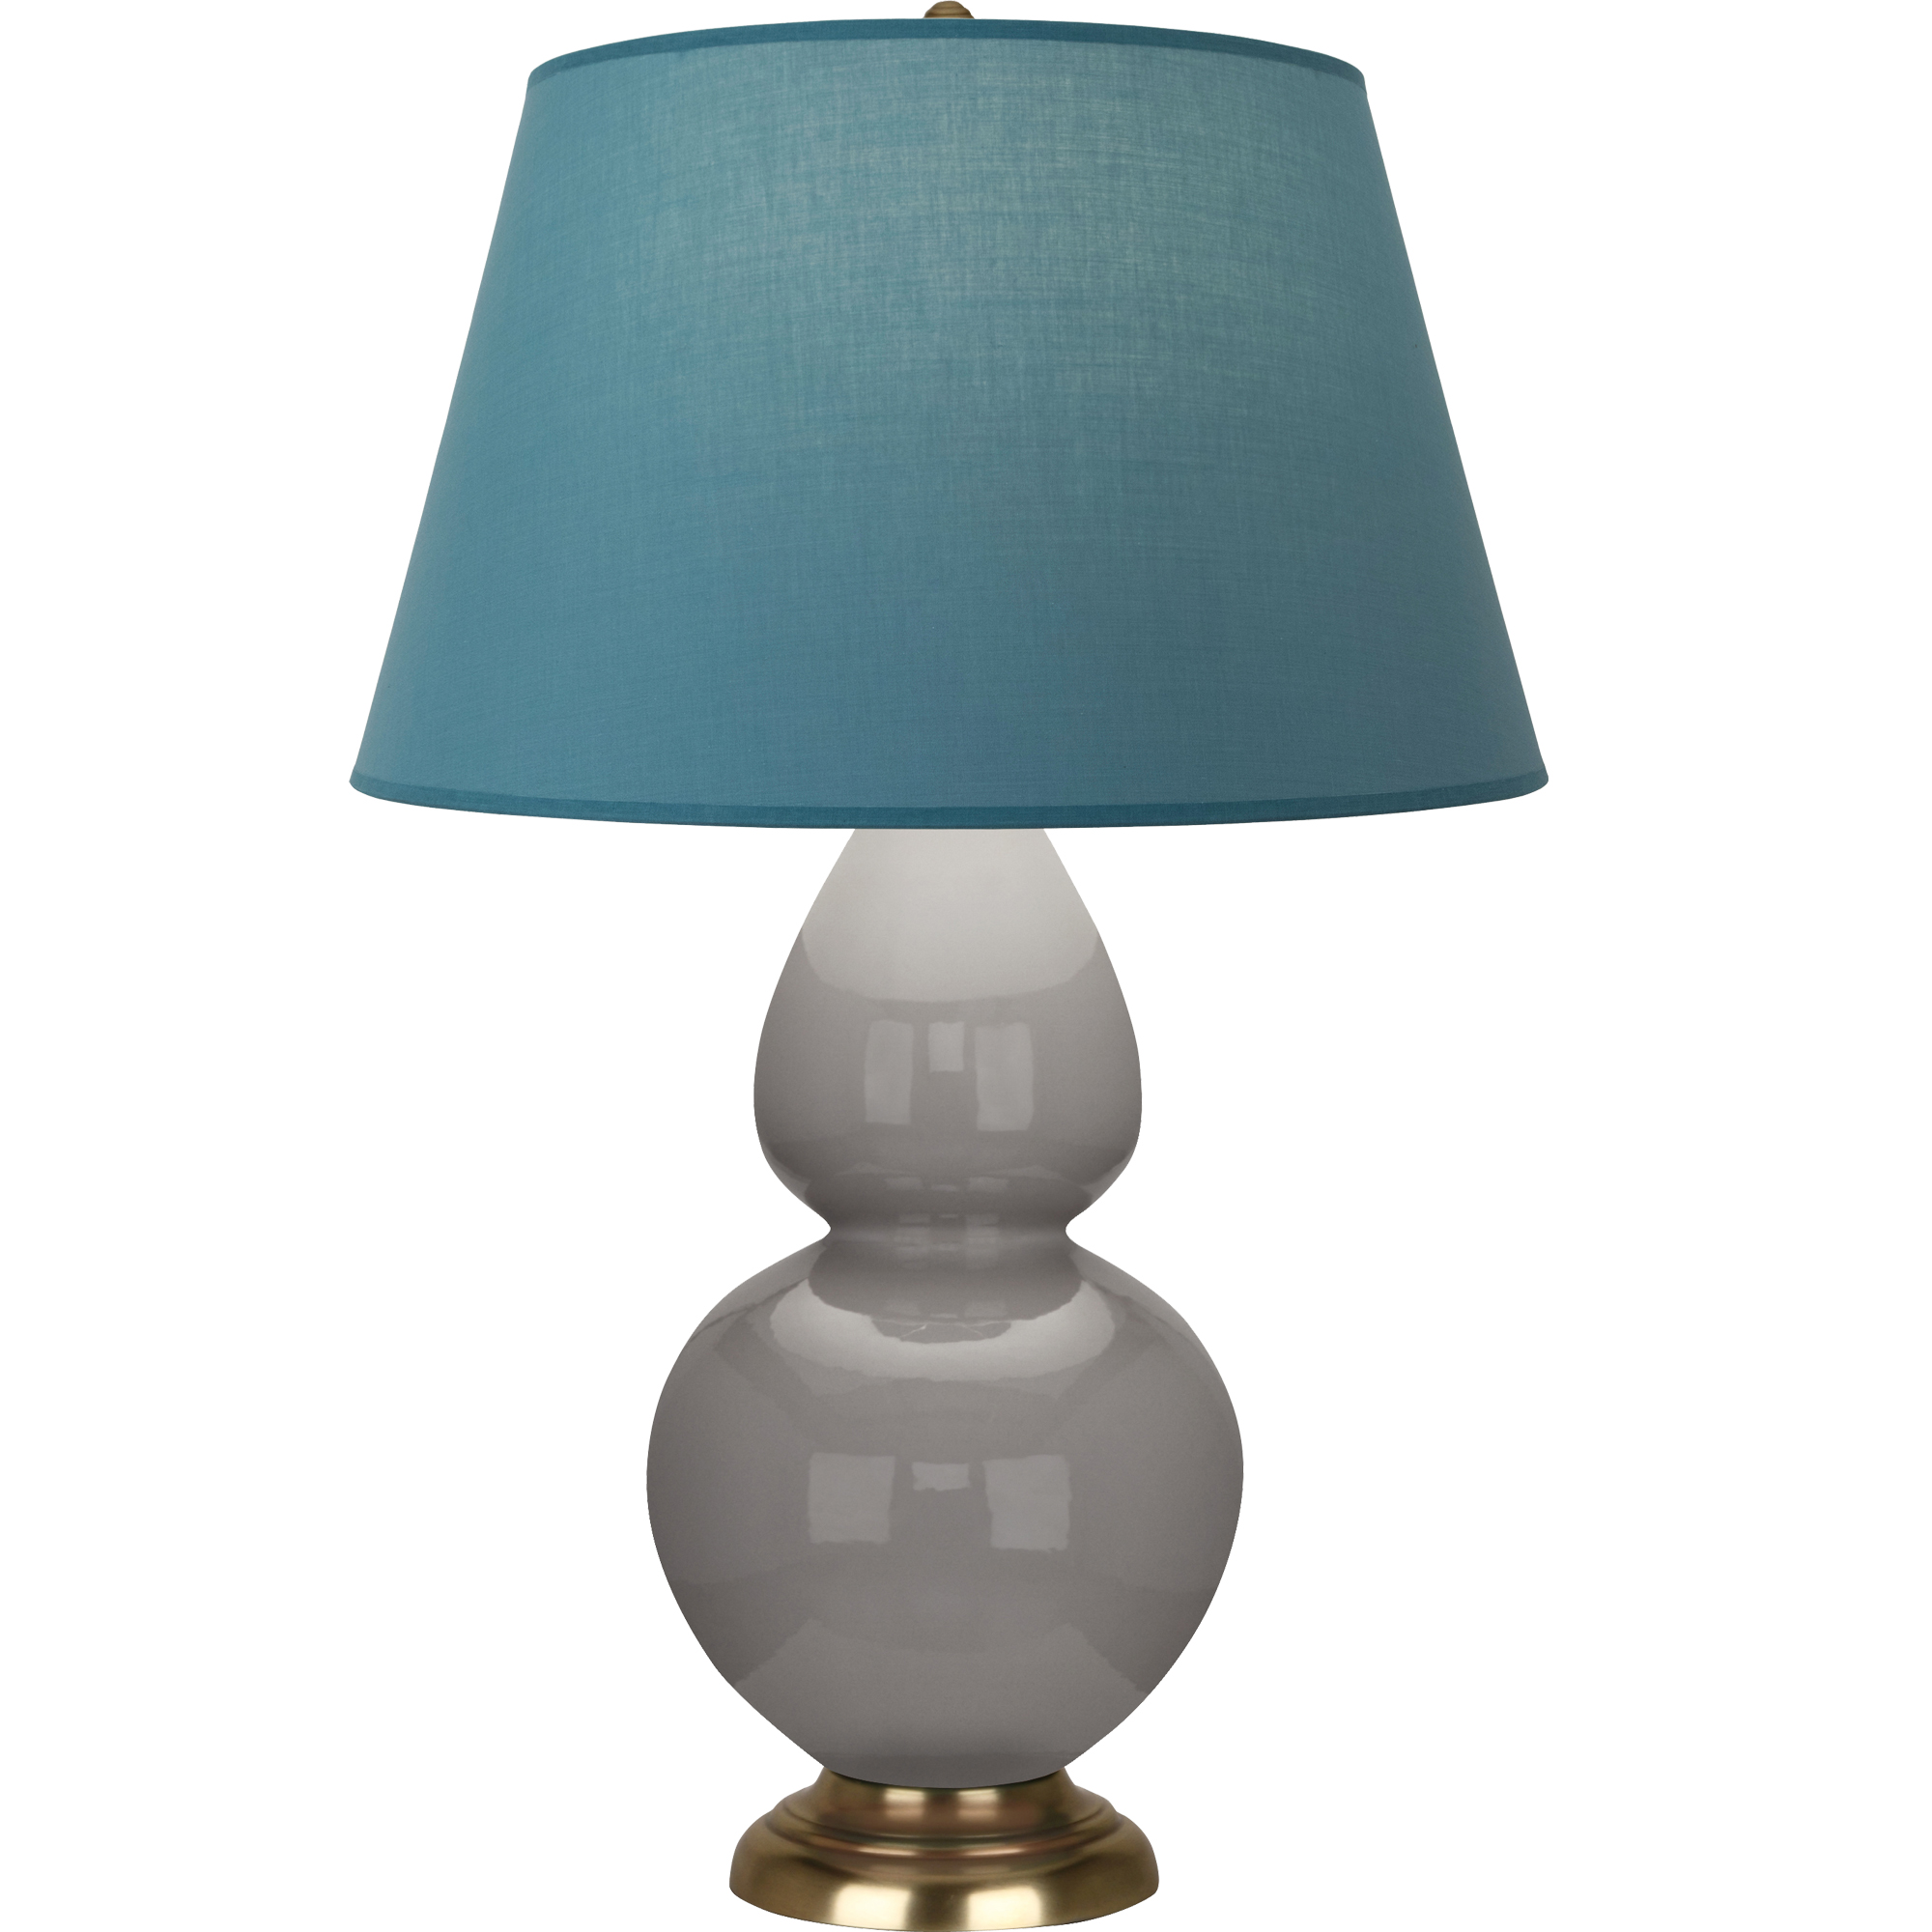 Double Gourd Table Lamp Style #1748B